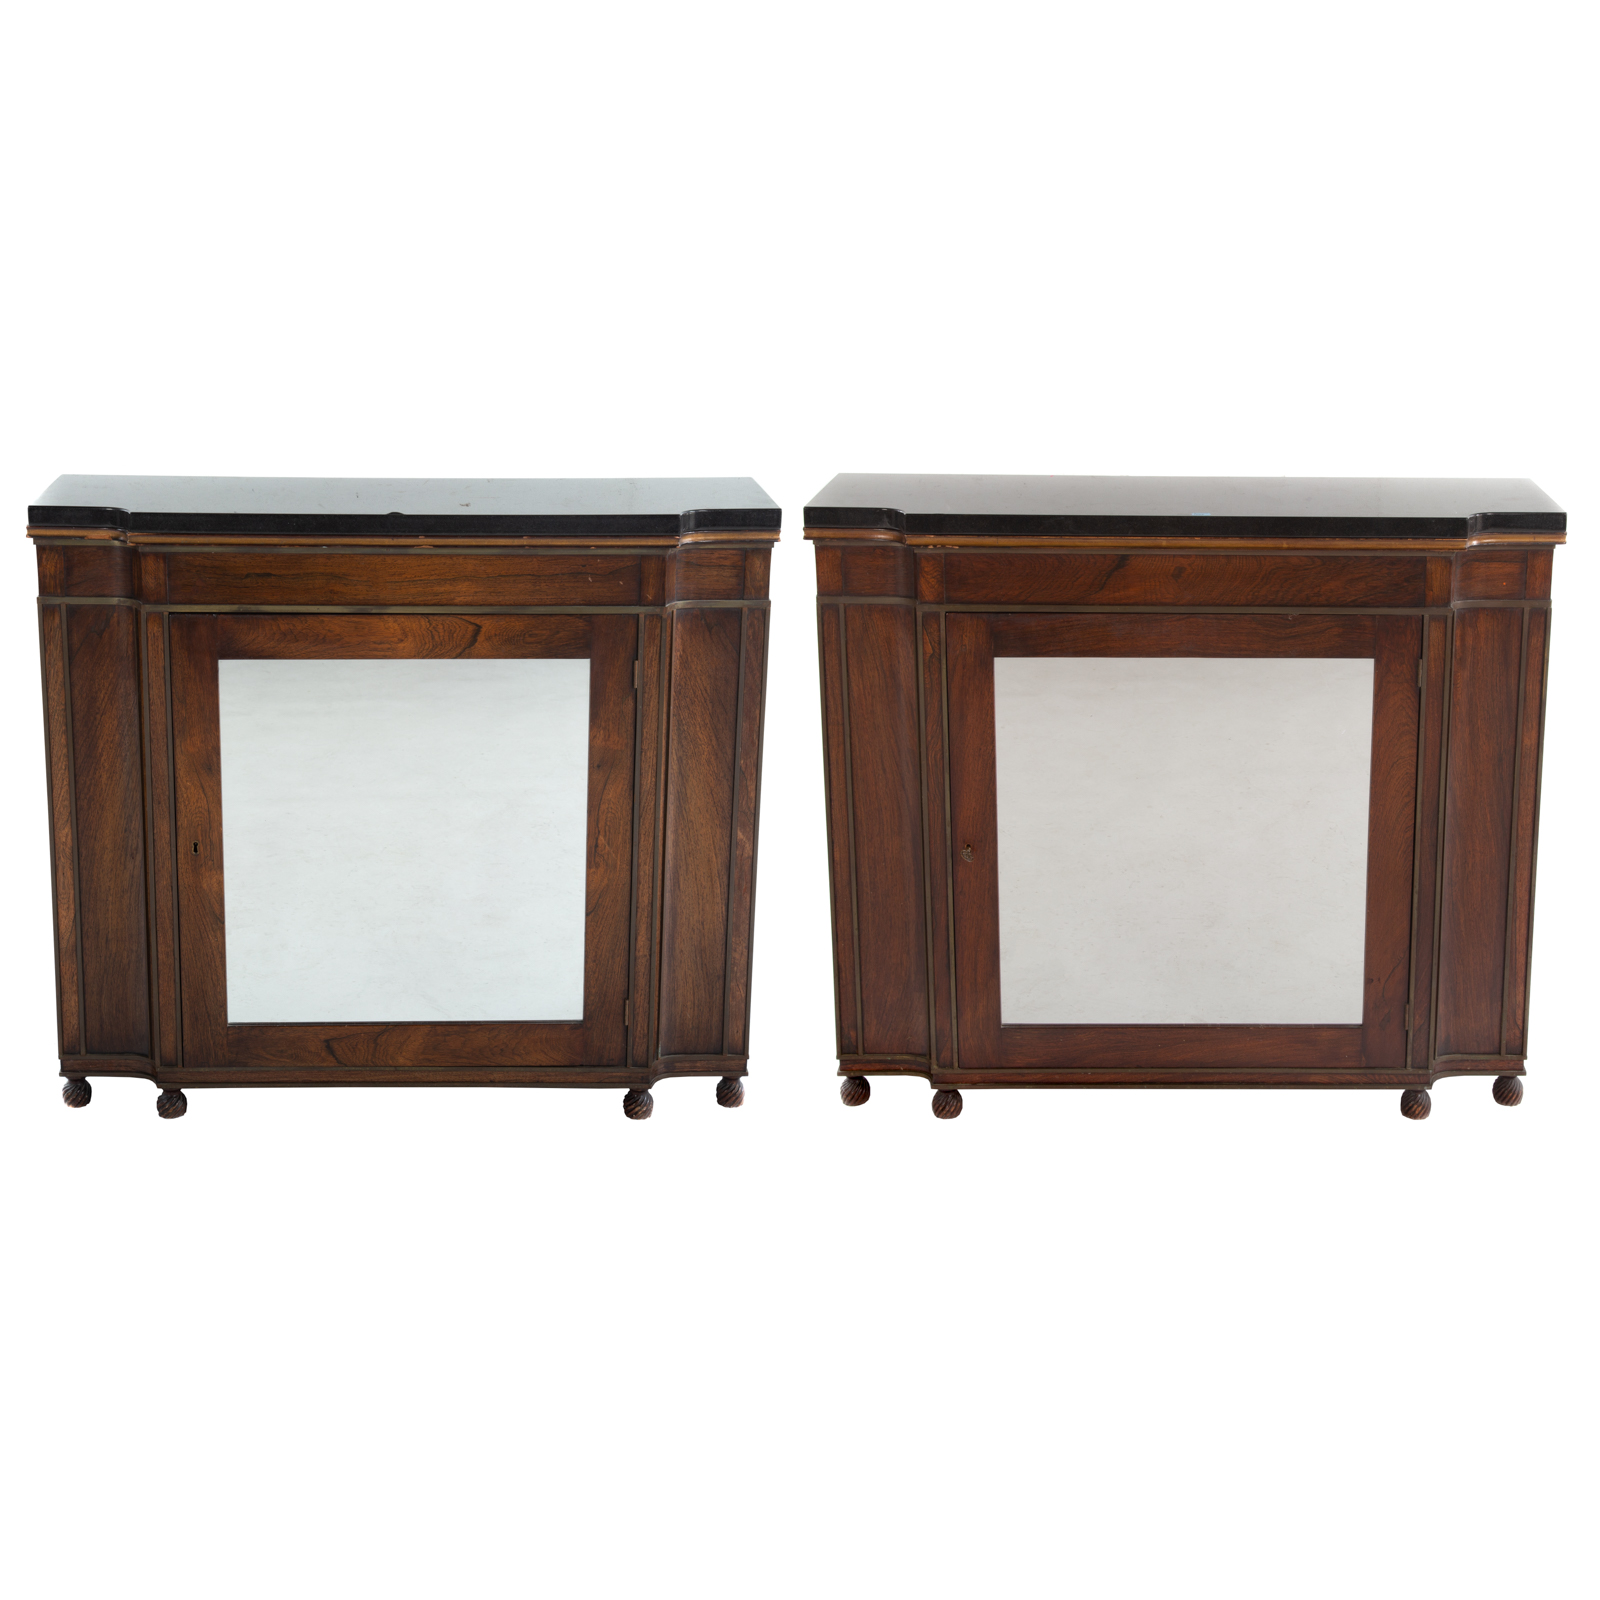 A PAIR OF CONTINENTAL STYLE MARBLE 2ea07e